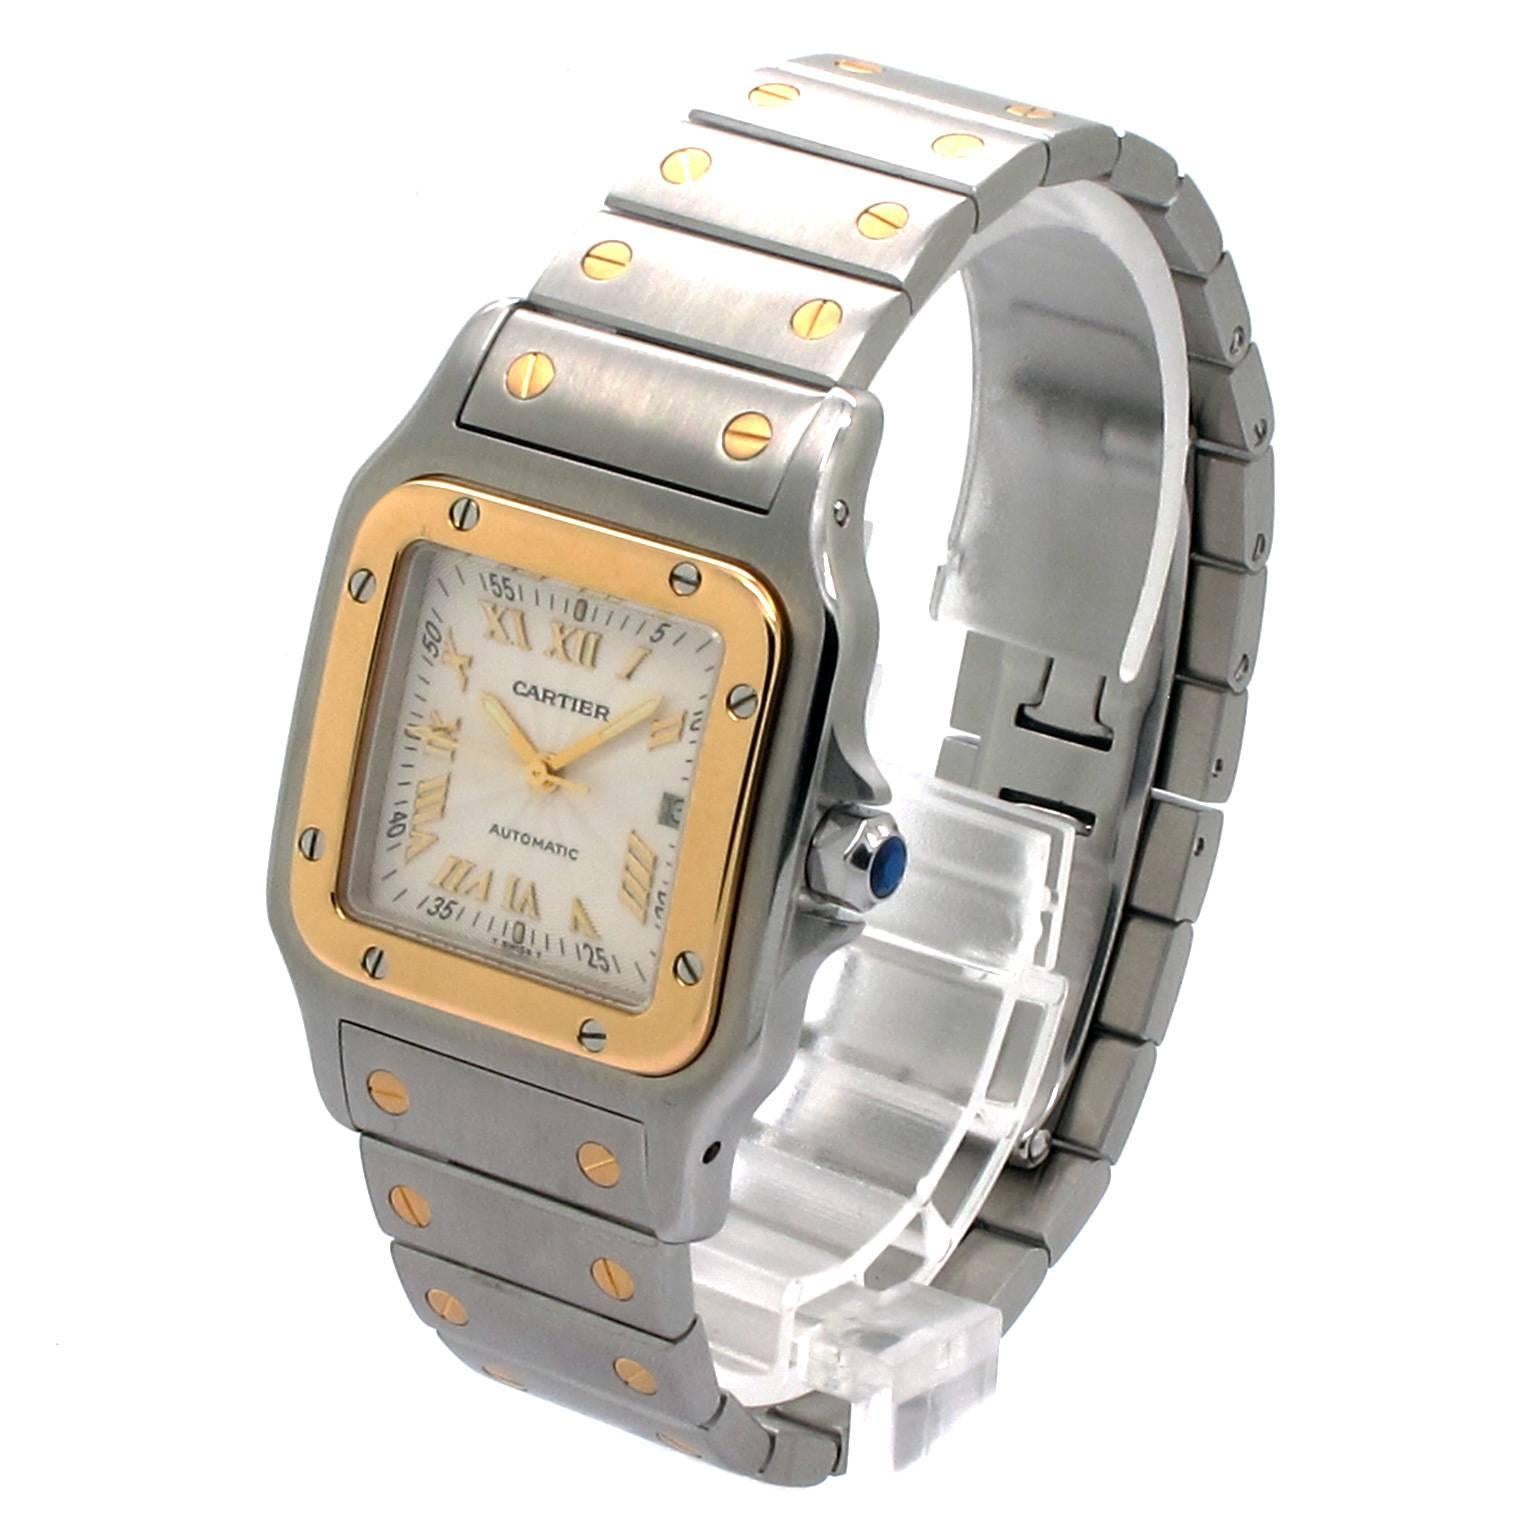 Cartier Santos Galbee W20058C4 Two-Toned Unisex Watch with a 29mm Stainless Steel Case and a fixed Original Cartier 18K yellow gold bezel punctuated with 8 signature screws. Original Cartier silvered Guilloche dial with raised gold roman numerals.